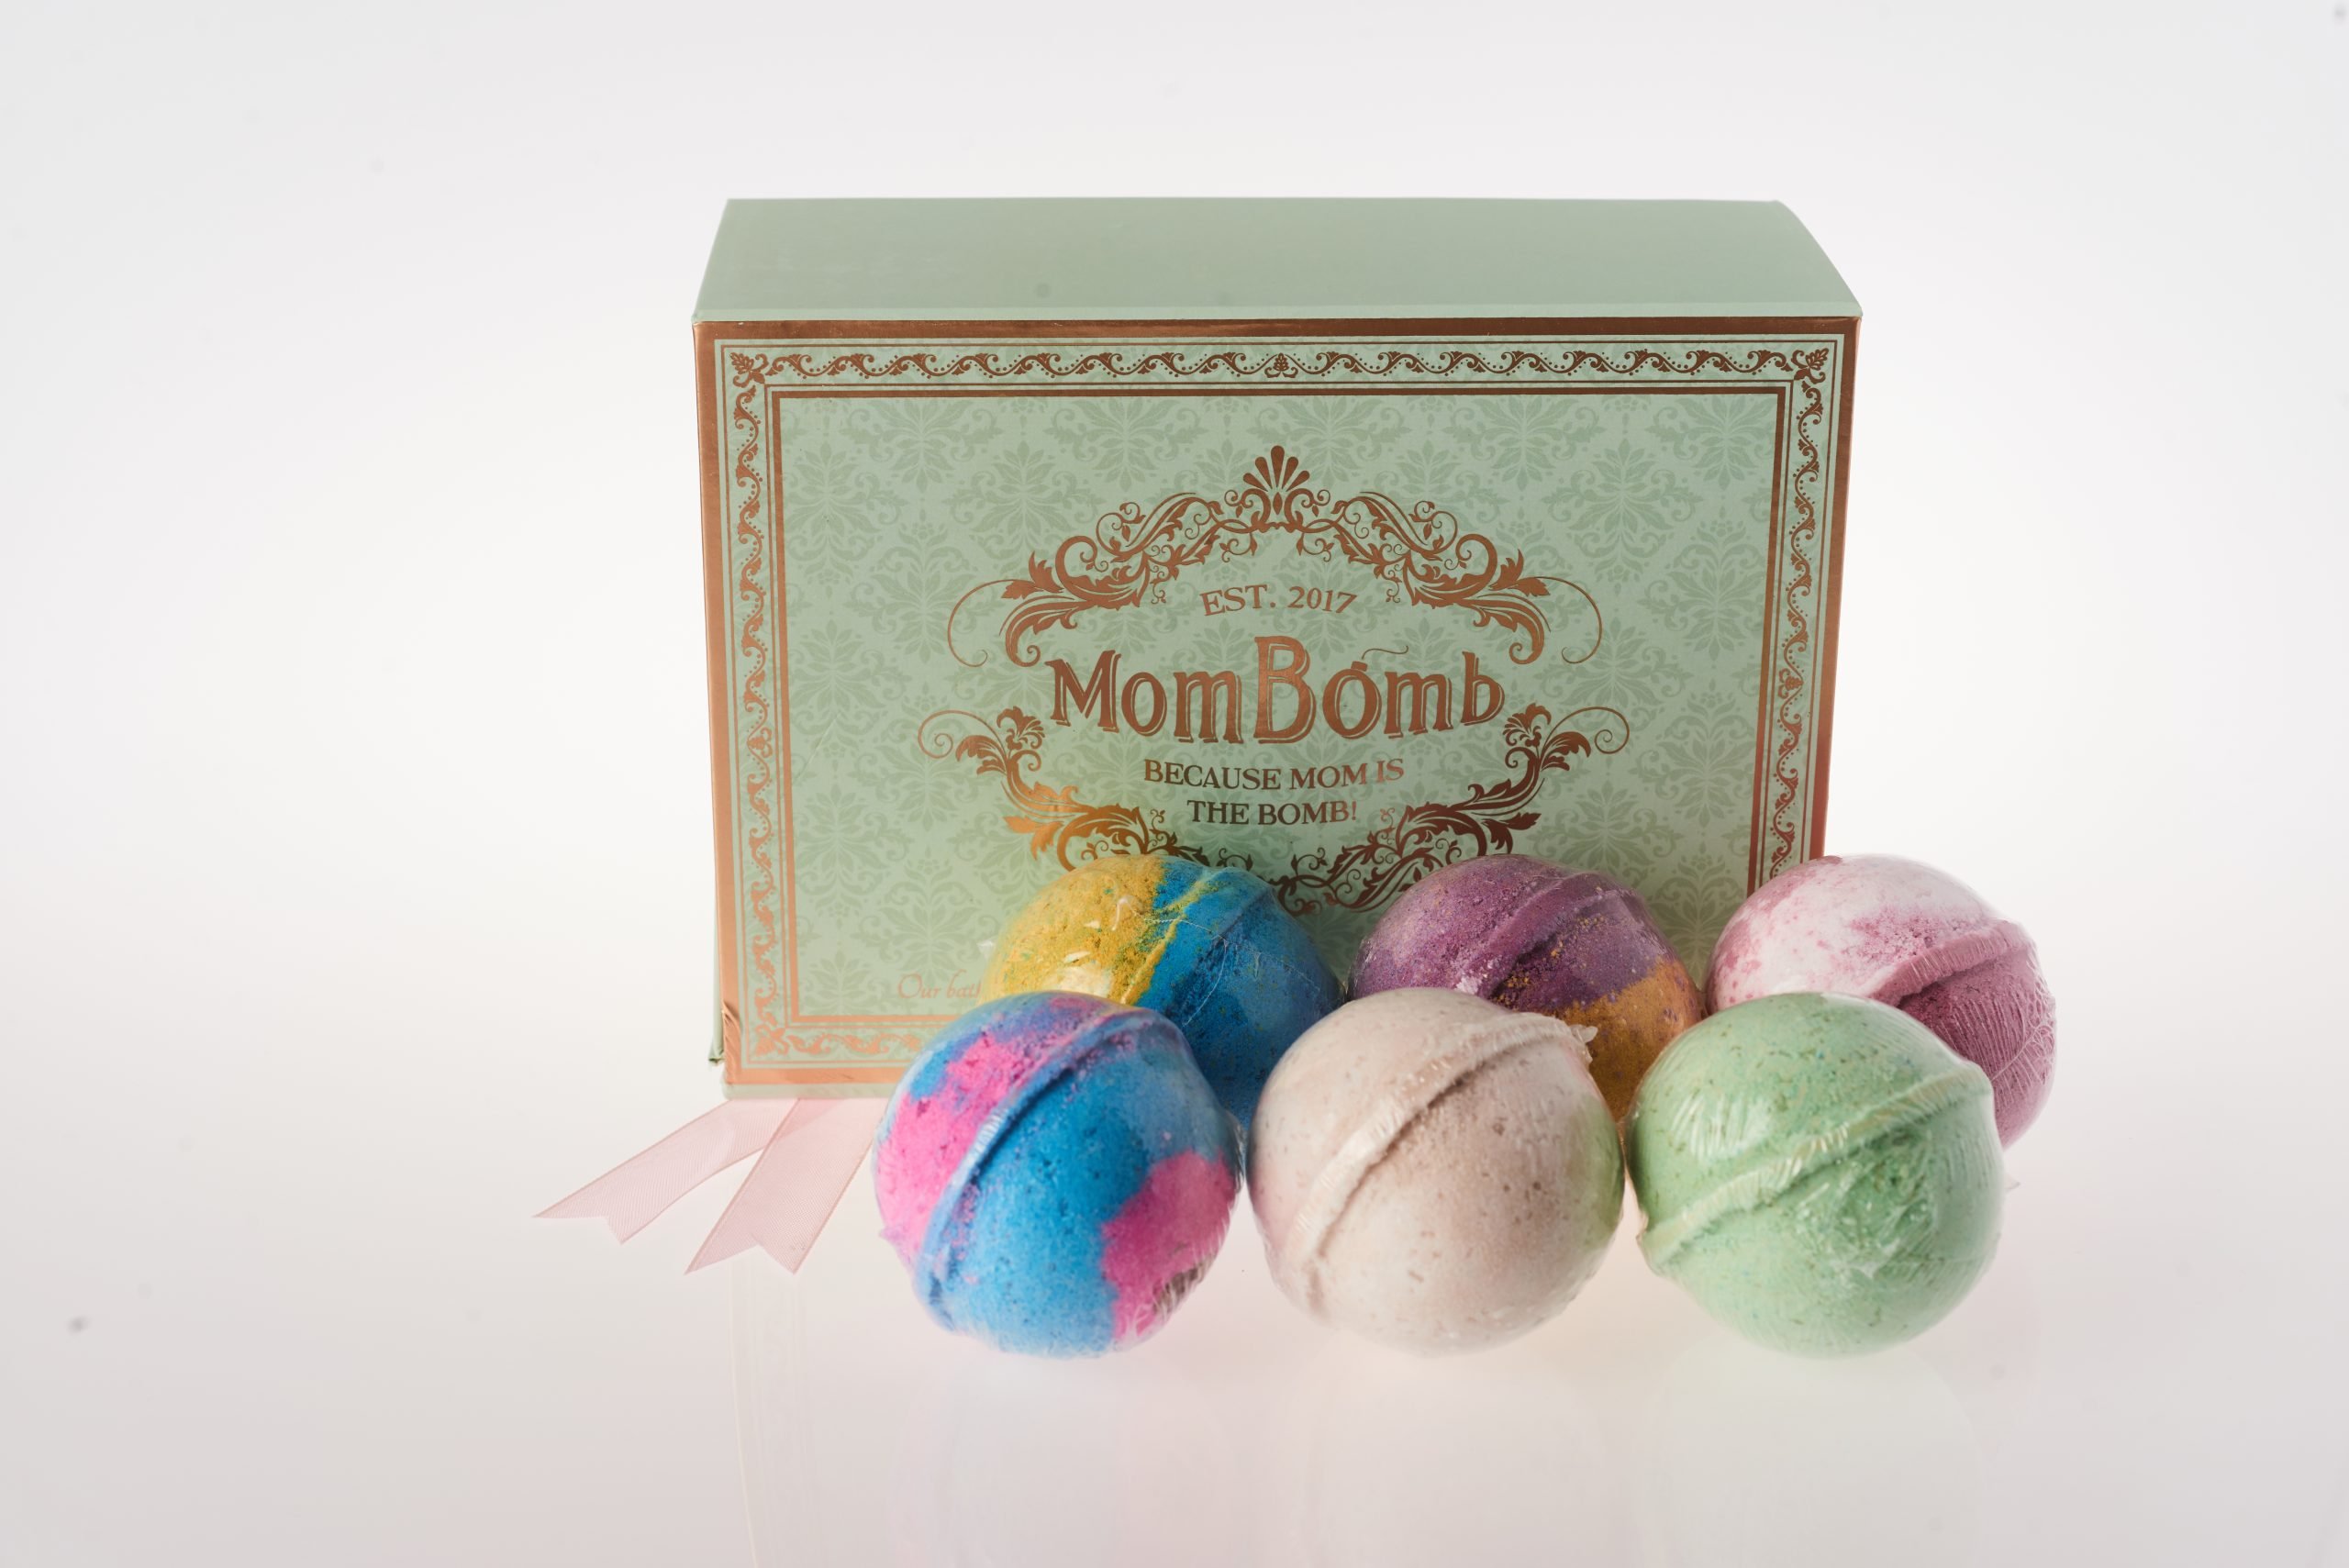 six bath bombs sitting in front of a box with the Mom Bomb logo